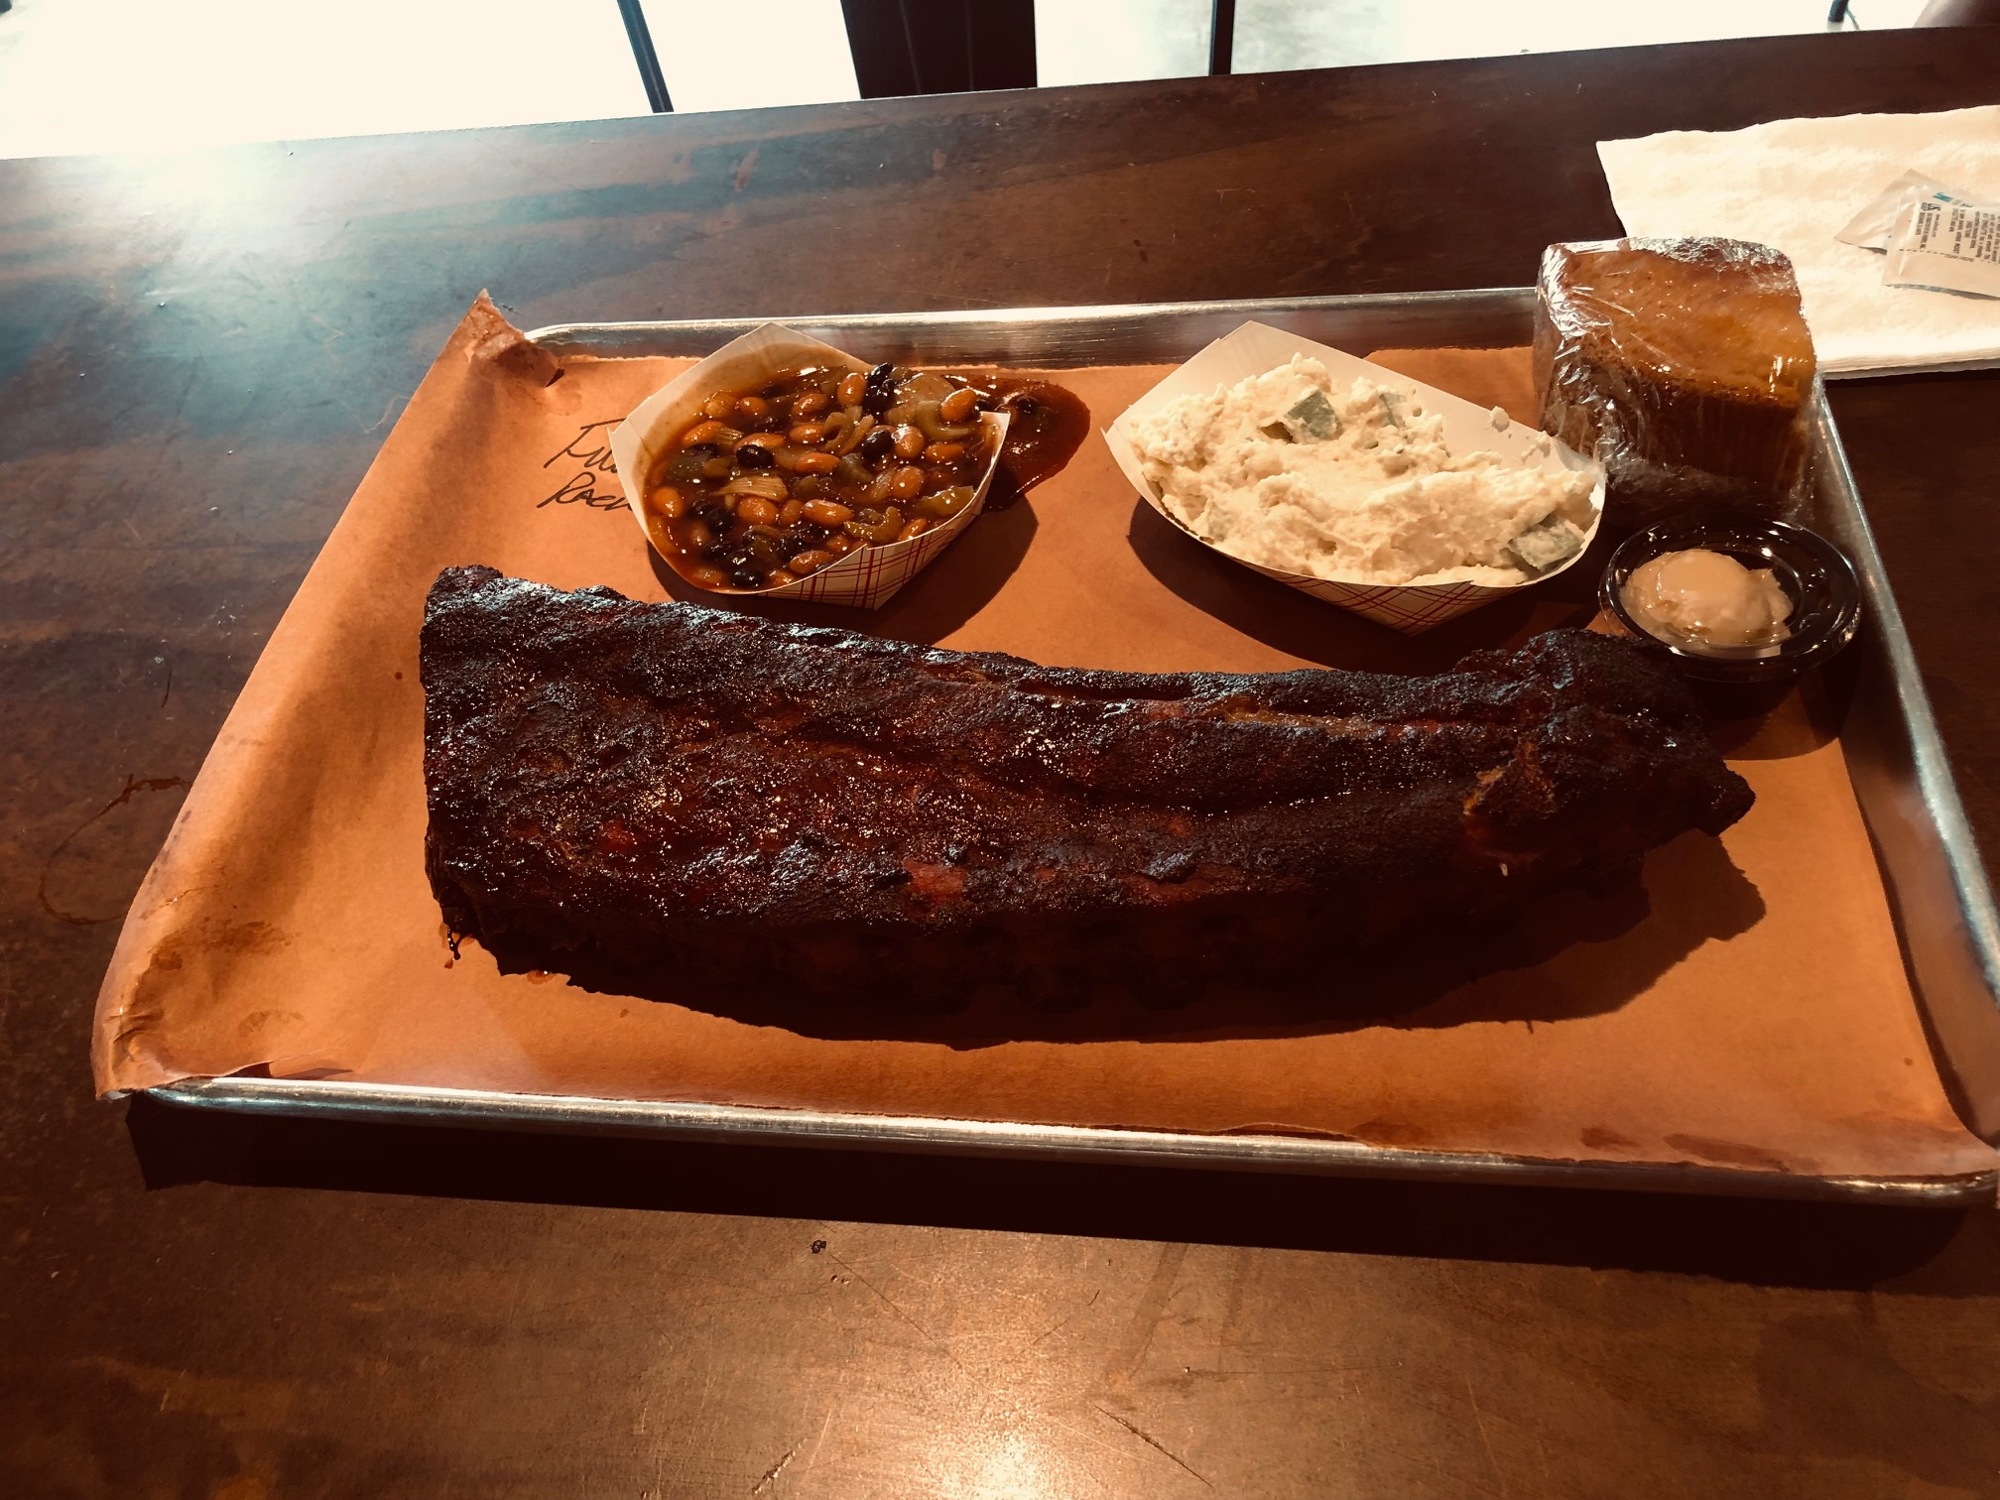 Sugarfire’s menu includes smoked ribs, brisket, pulled pork, turkey and sausage links, salmon, burgers, specialty sandwiches, salads, sides, desserts, shakes and floats, a kid’s meal and more.